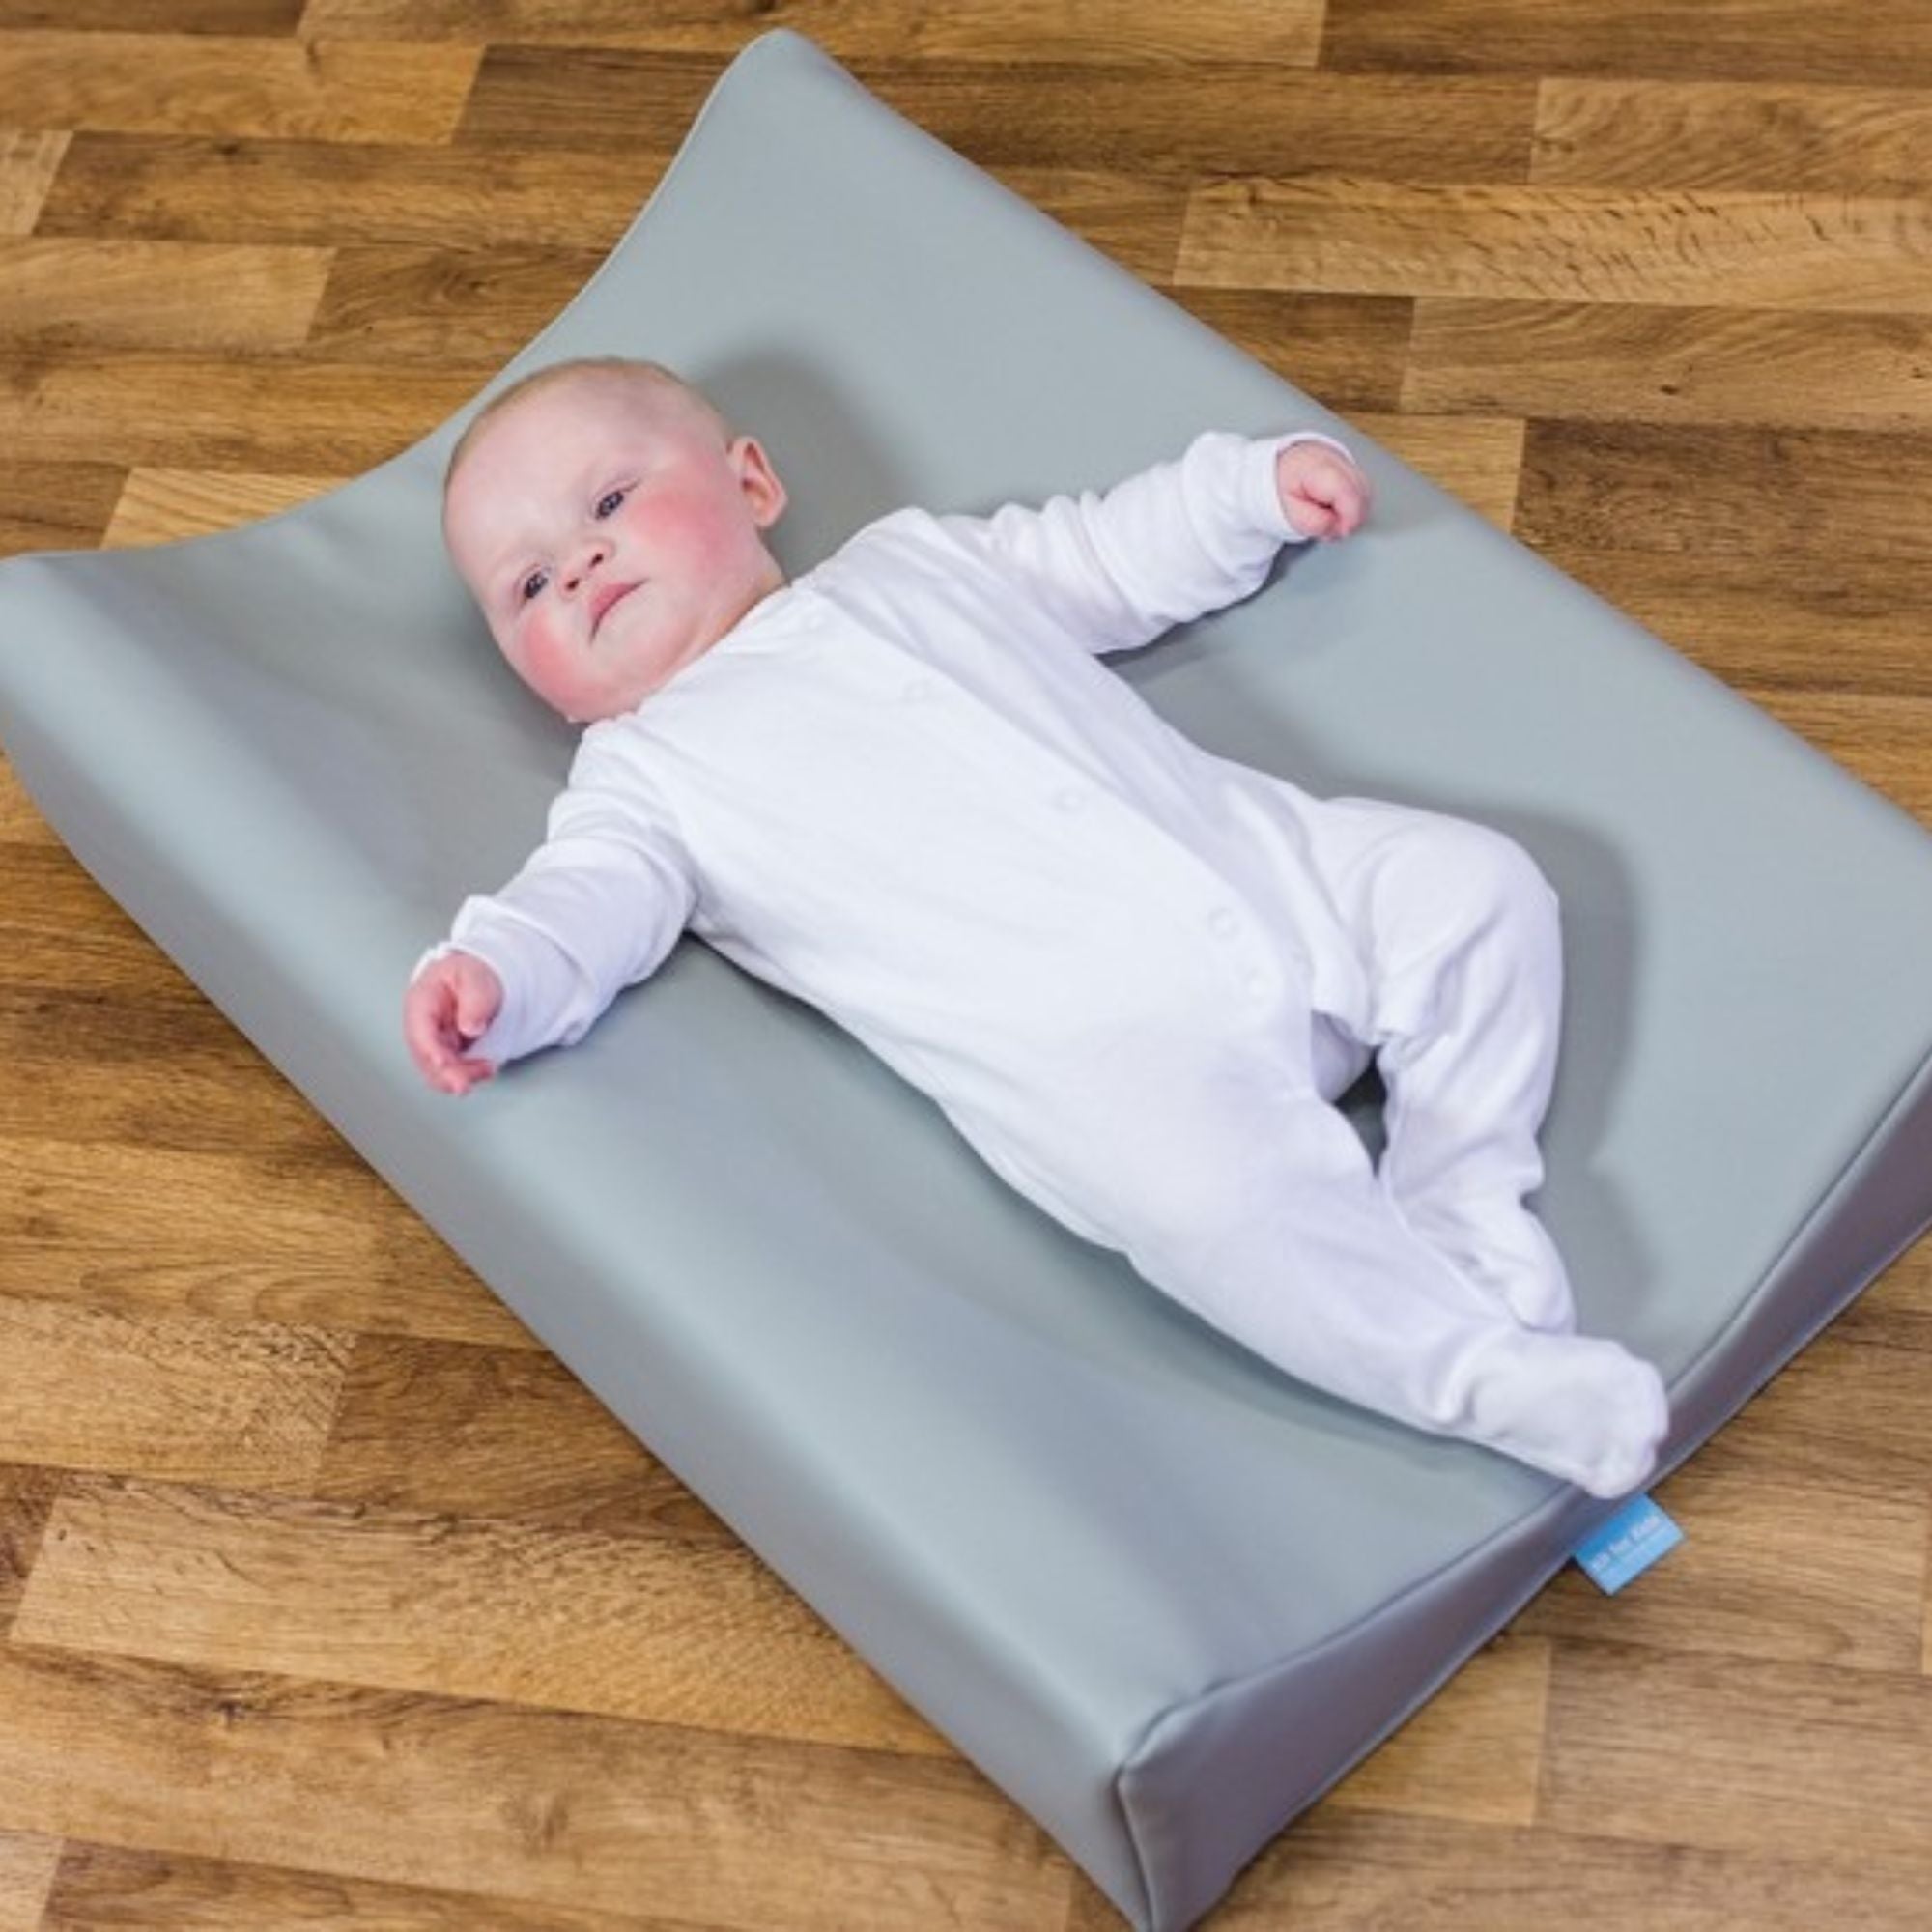 Snoozeland® Changing Mat Grey Pack of 3, The Snoozeland® Changing Mat Grey Pack of 3 is our toughest professional changing mat for use on its own or on changing tables or units. The Snoozeland® Changing Mat Grey Pack of 3 has a deep profiled foam design forms a concave surface to gently hold active and larger babies without restricting access The Snoozeland® Changing Mat Grey Pack of 3 has a Wipe-clean surface designed for constant cleaning The Snoozeland™ Changing Mat comes as a set of 3 changing mats. Our